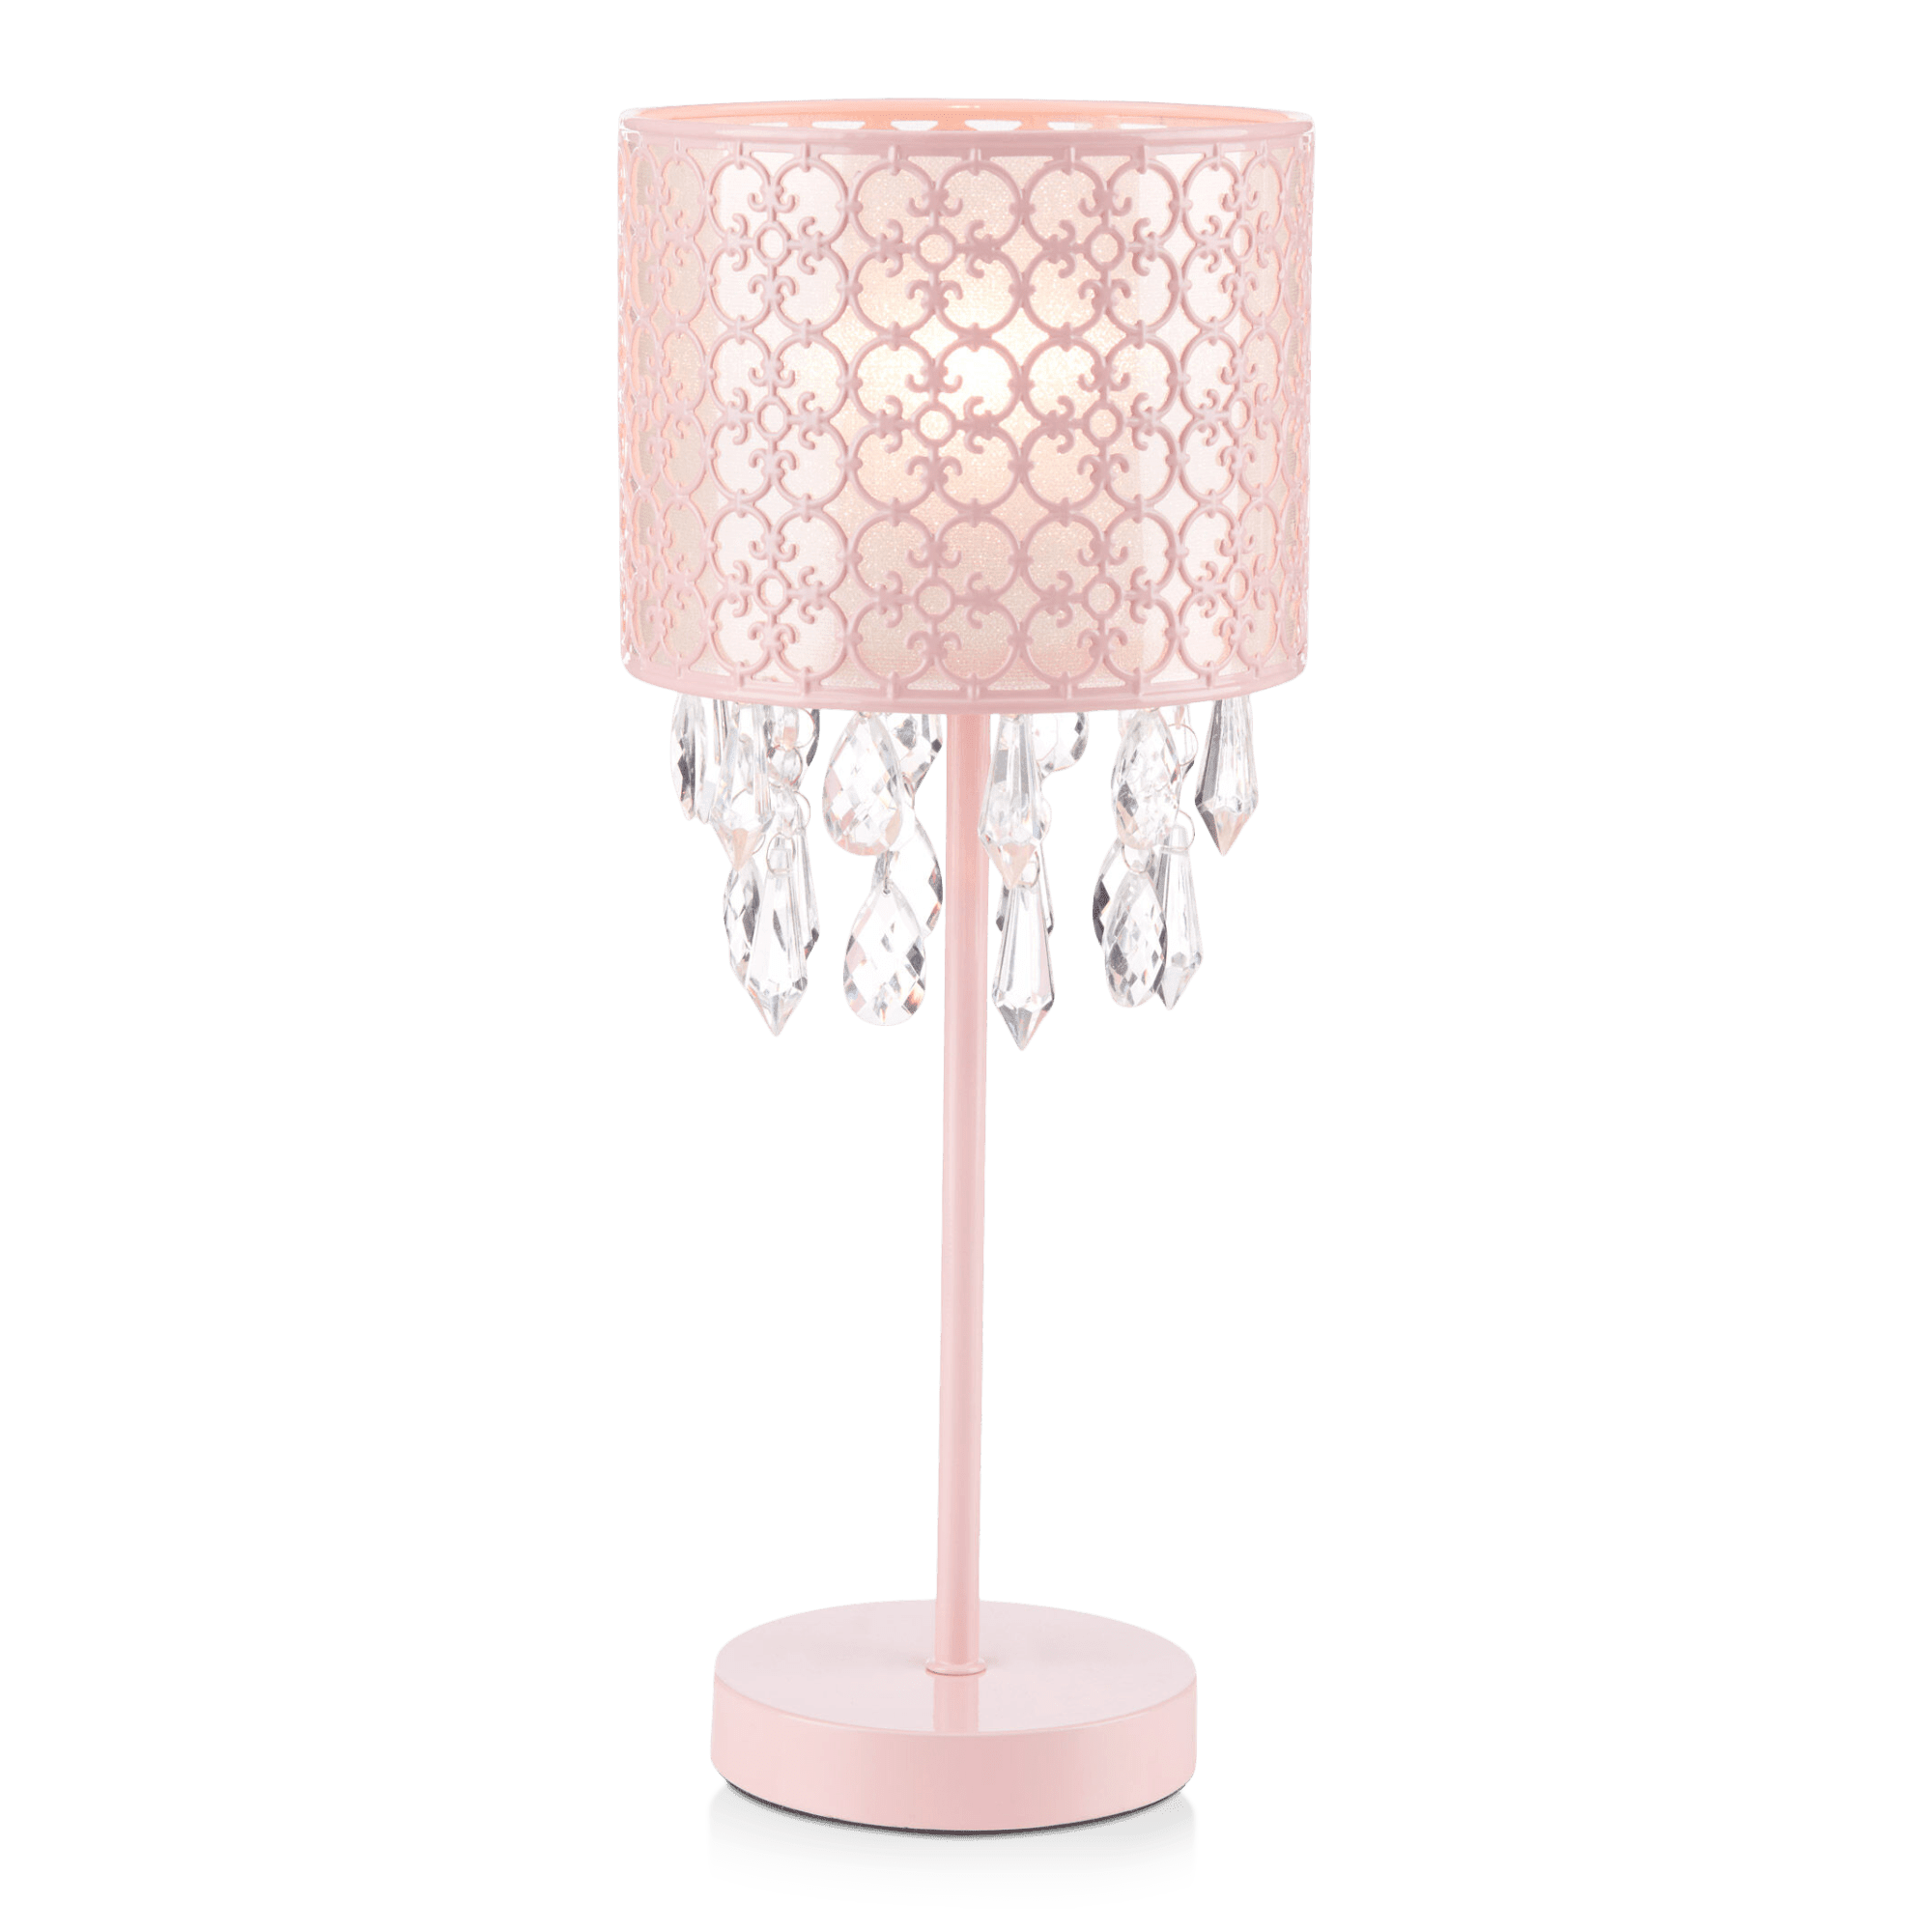 Baroque Table Lamp with Decorative Droplets